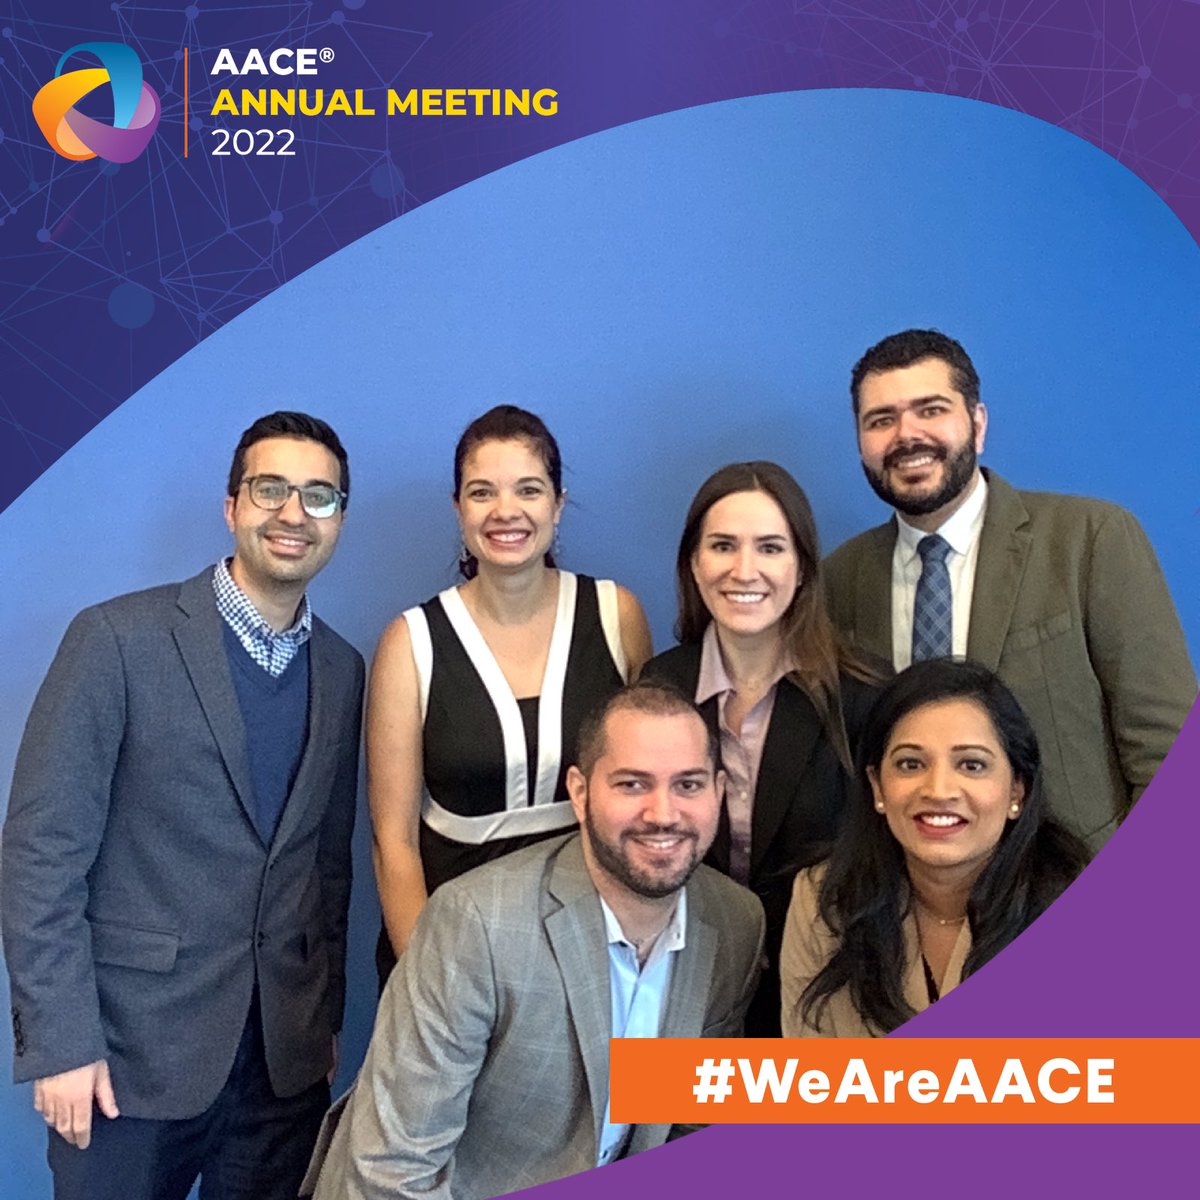 Fellow in Training representatives to AACE throughout the years, at the AACE 2022 Annual meeting #WEAREAACE